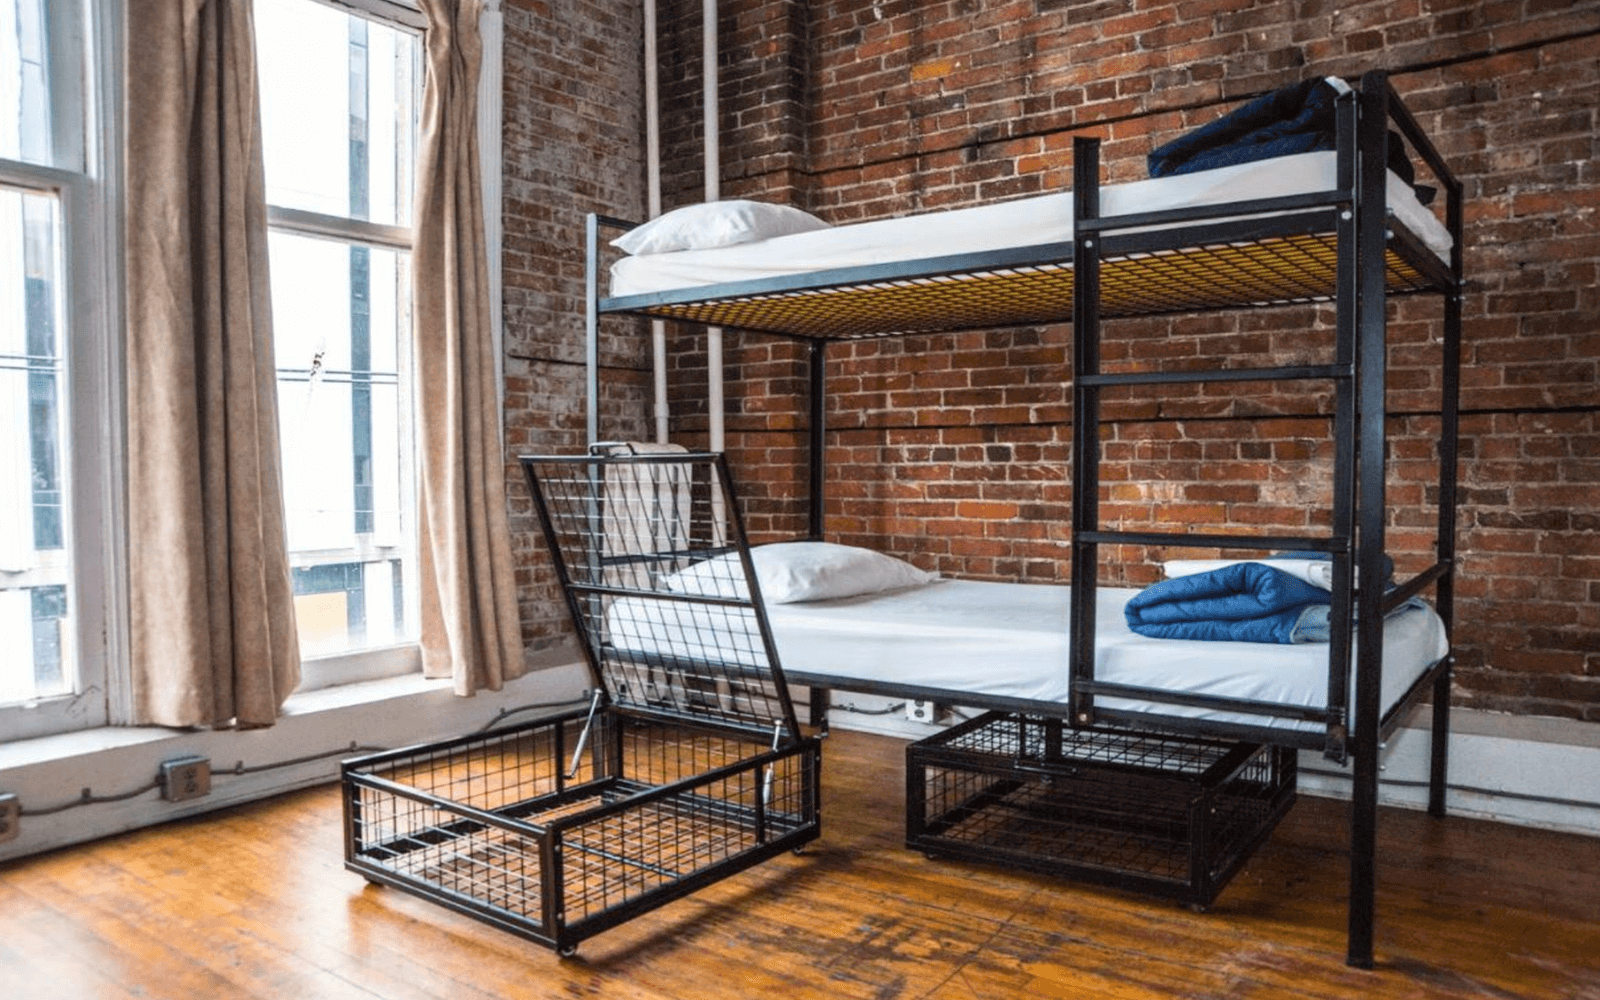 Dorm beds at the Cambie Gastown